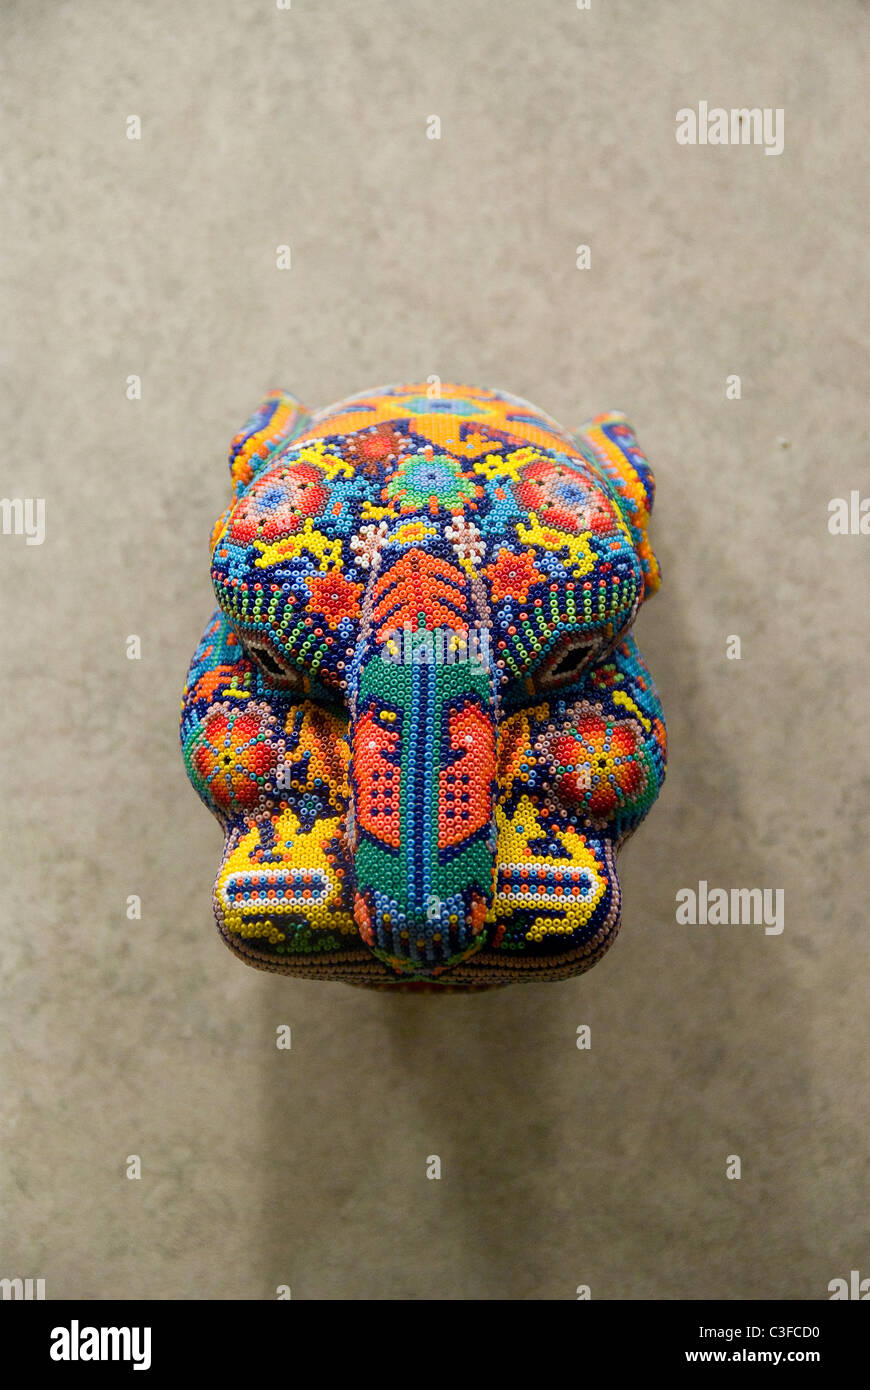 Mexico.Mexico city.National Museum of Anthropology. Huichol art. Stock Photo